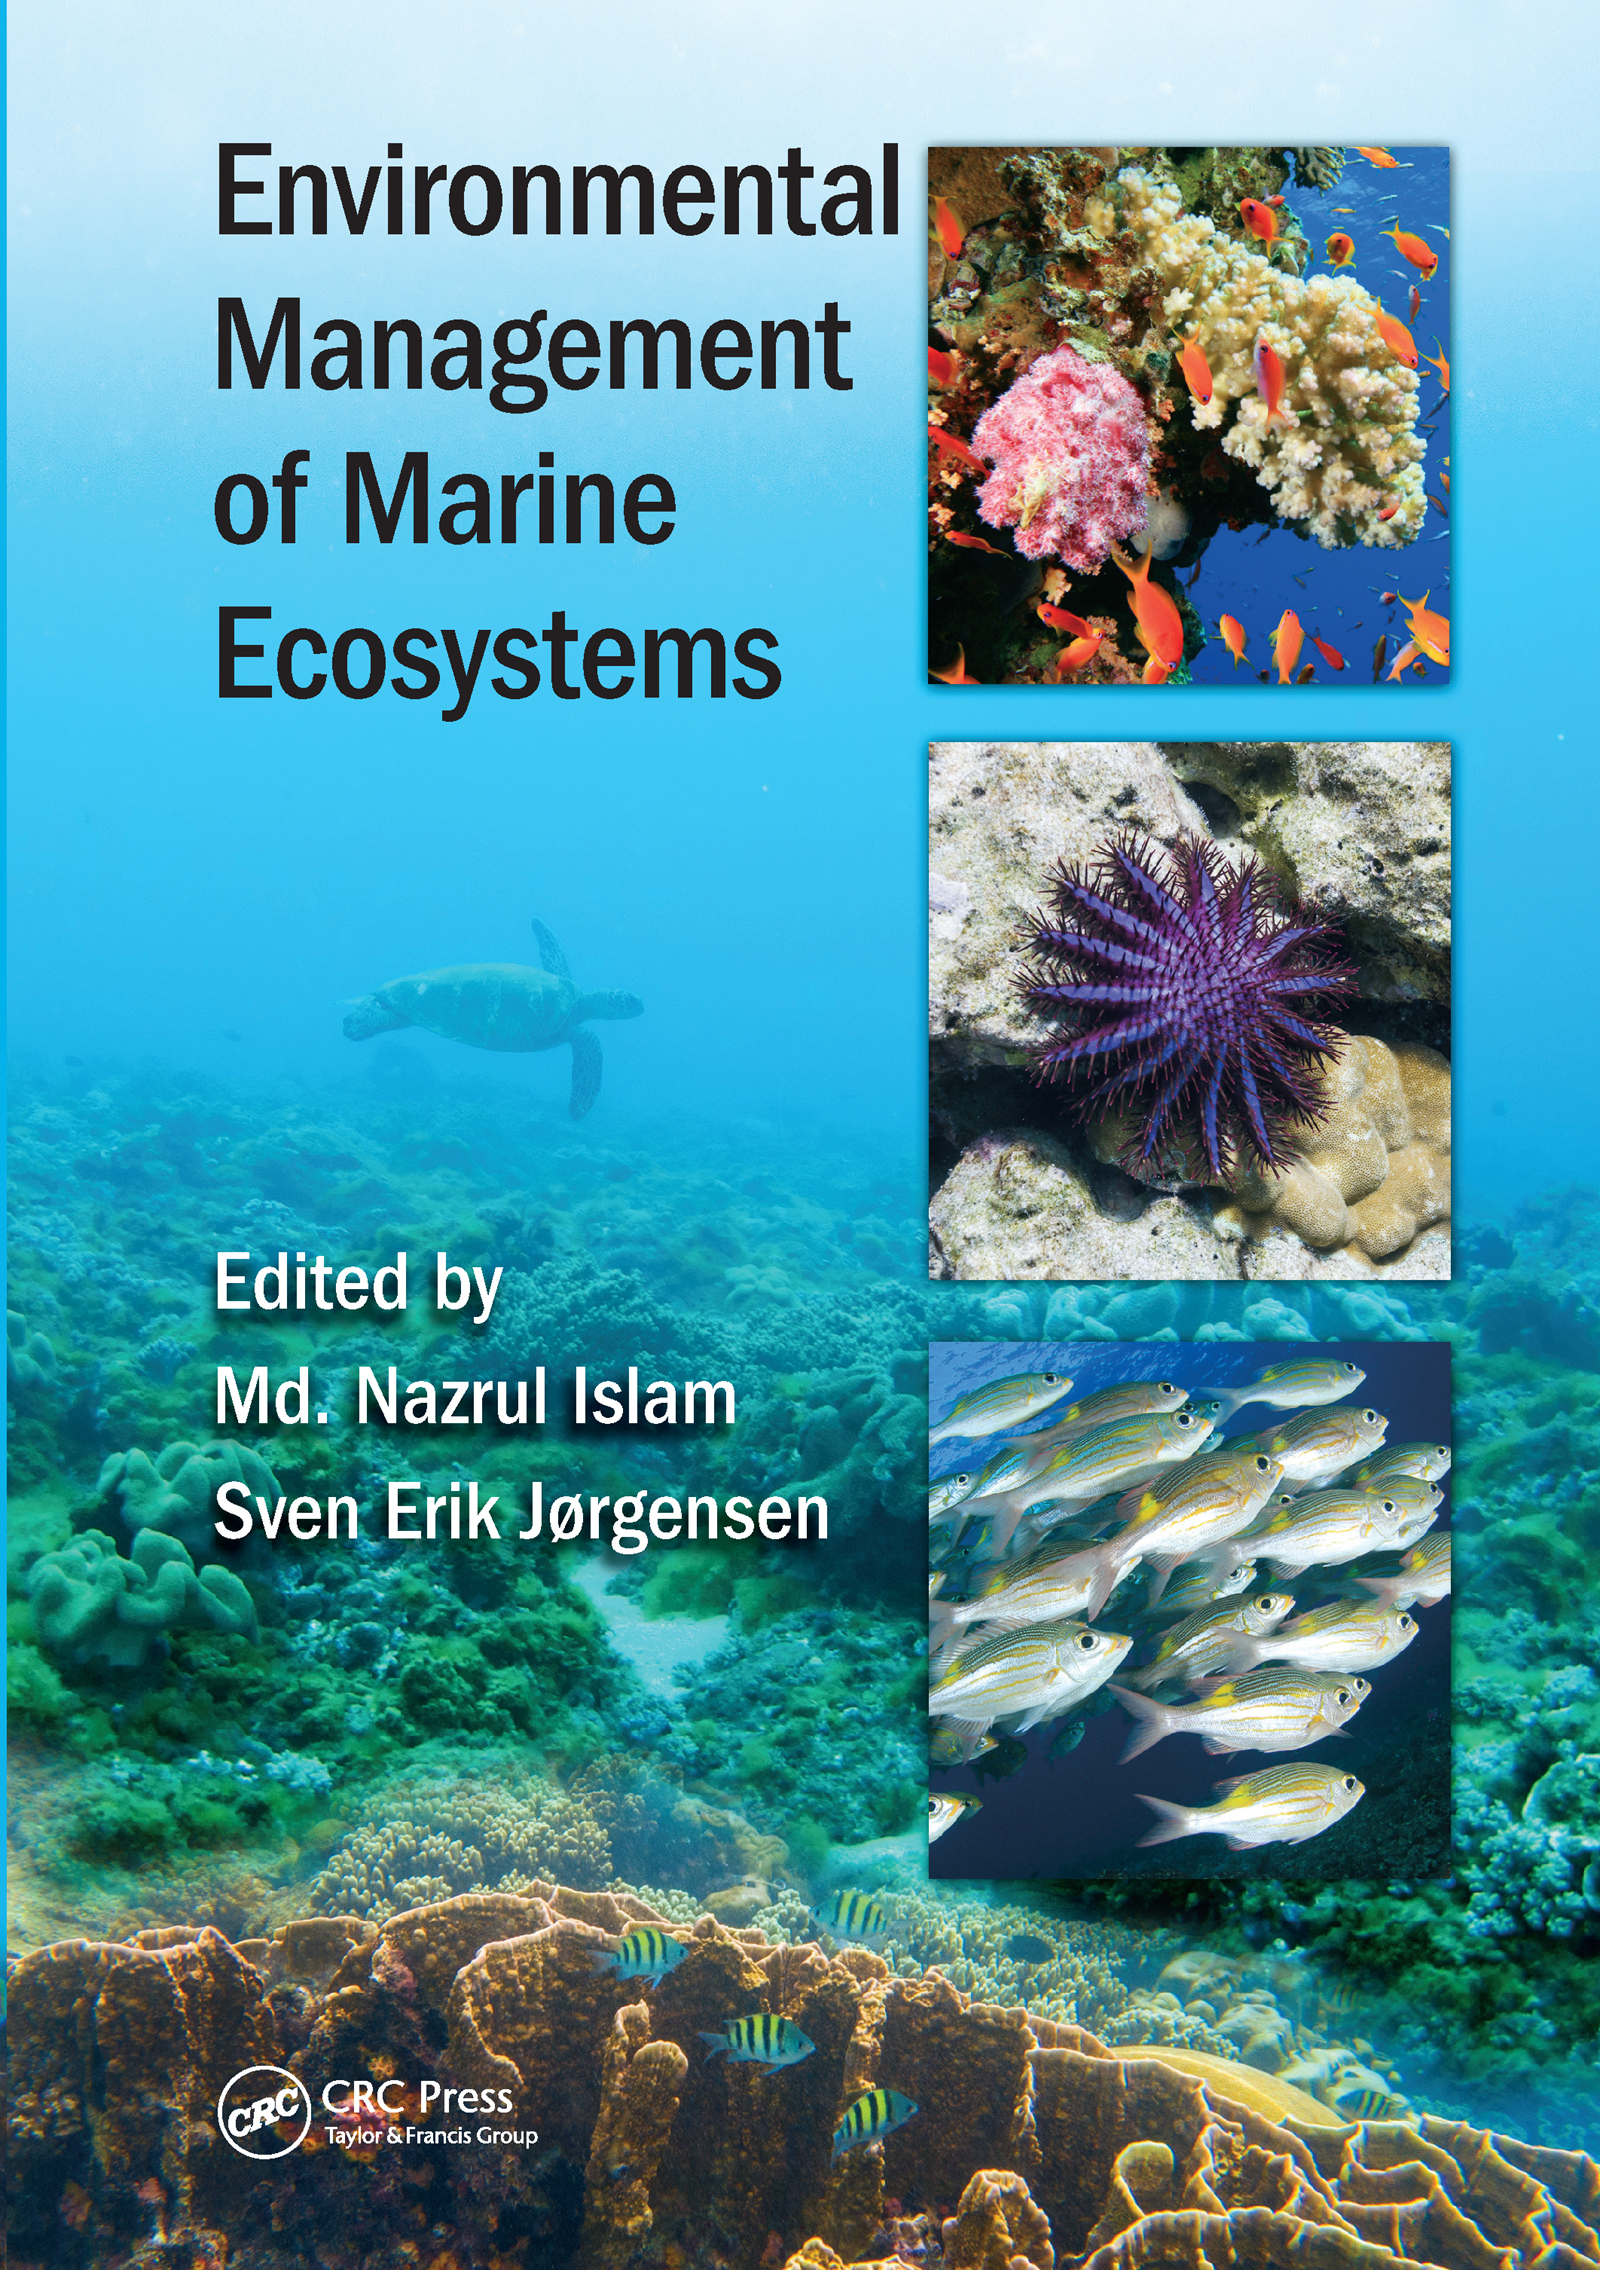 Climate change impacts on marine ecosystems in Vietnam. In: Environmental Management of Marine Ecosystems